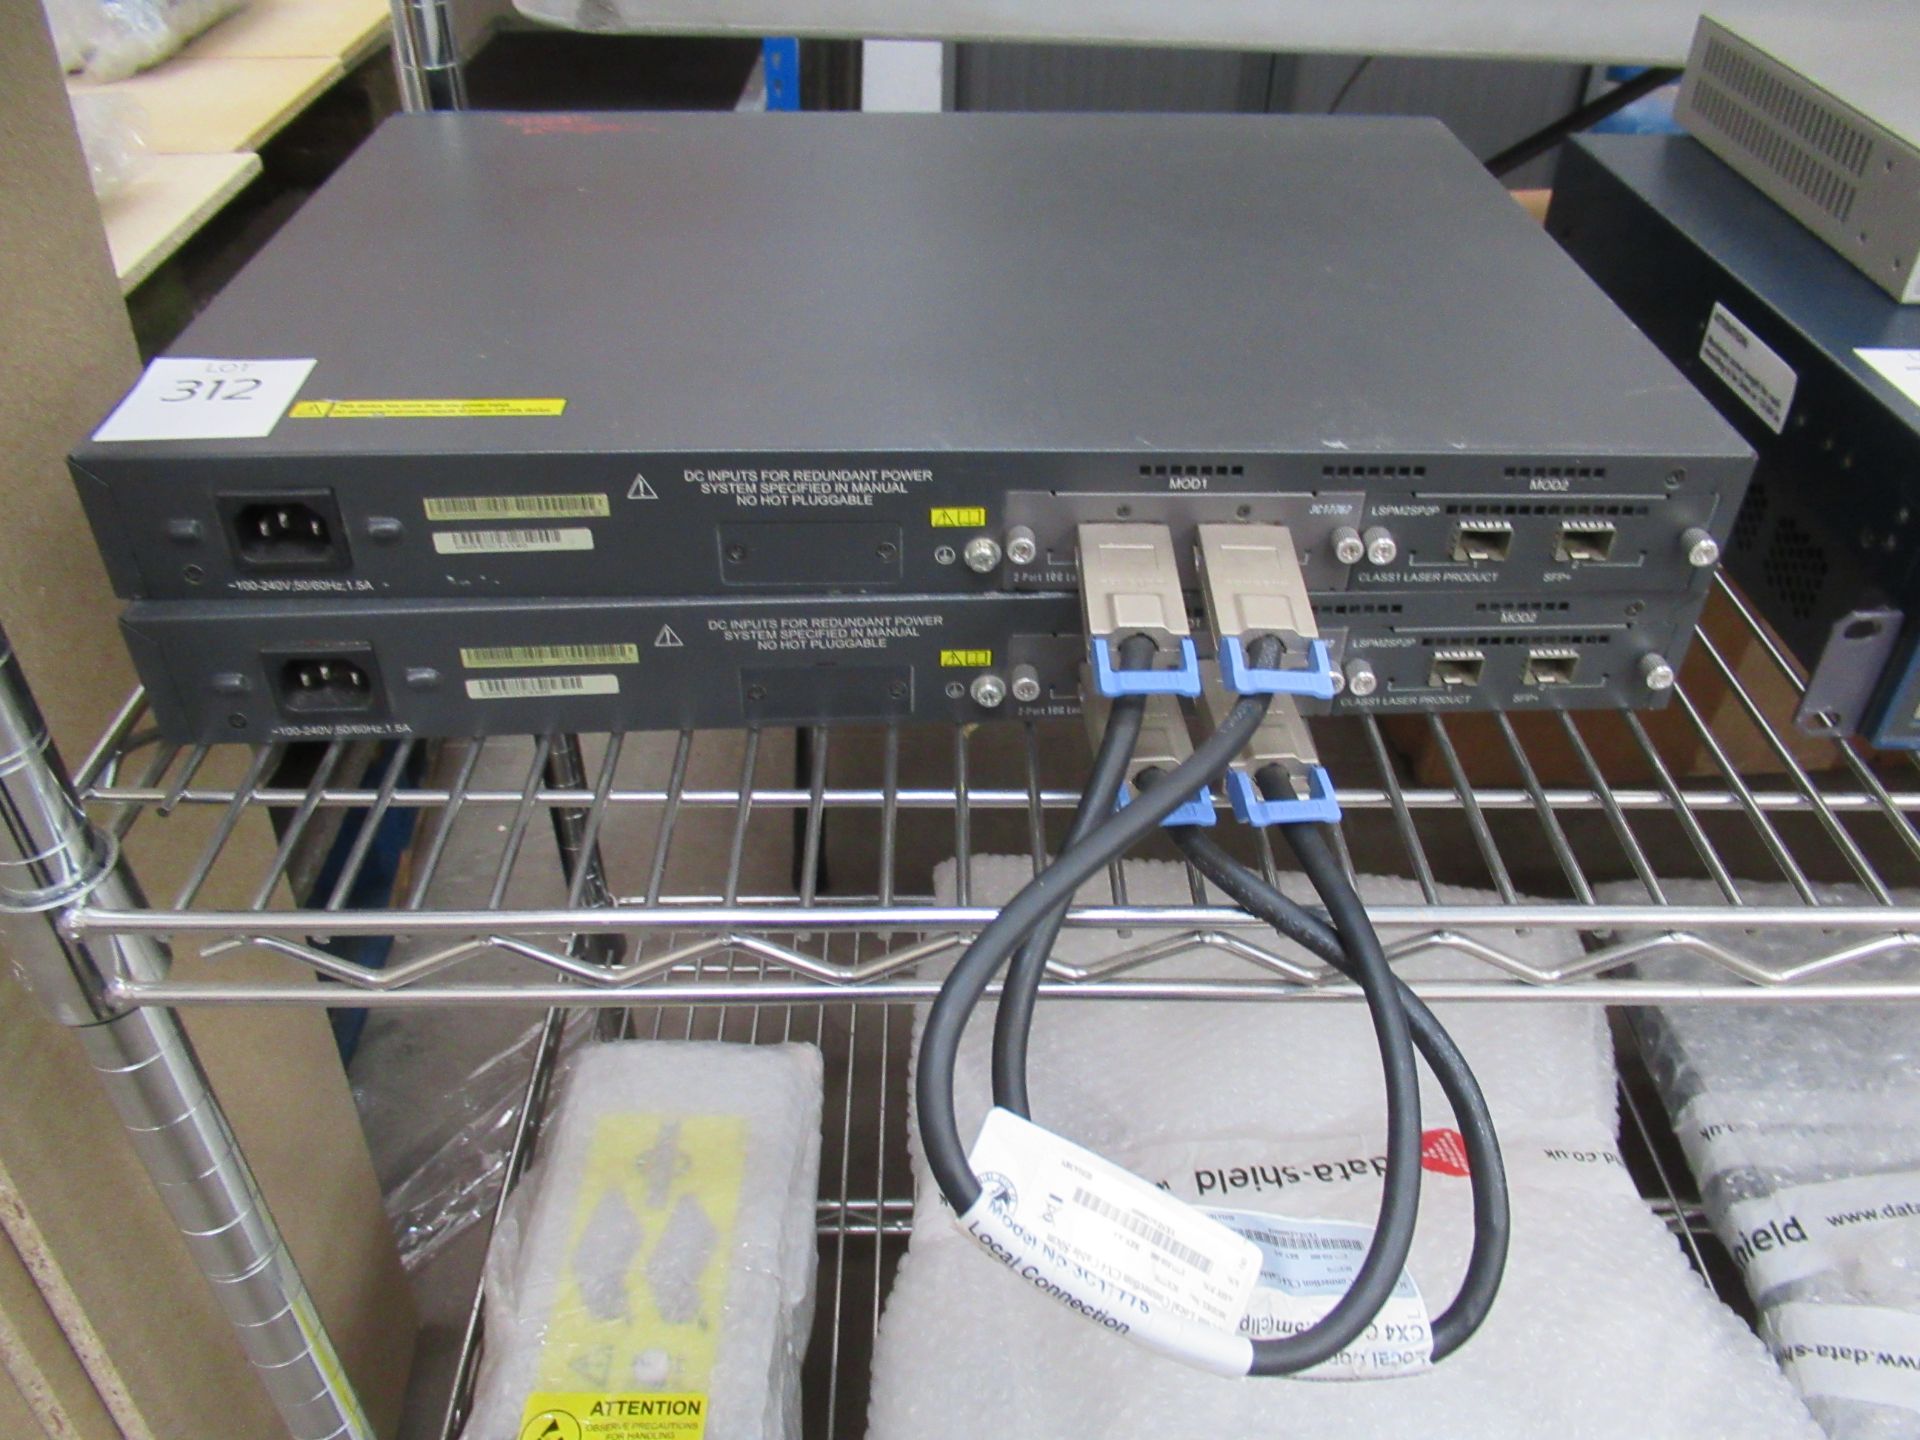 2 x Brocade AP7420 Switch, 2 x H3C S550 Series Ethernet Switch with CX4 Coupling Cable, 3 x - Image 7 of 38